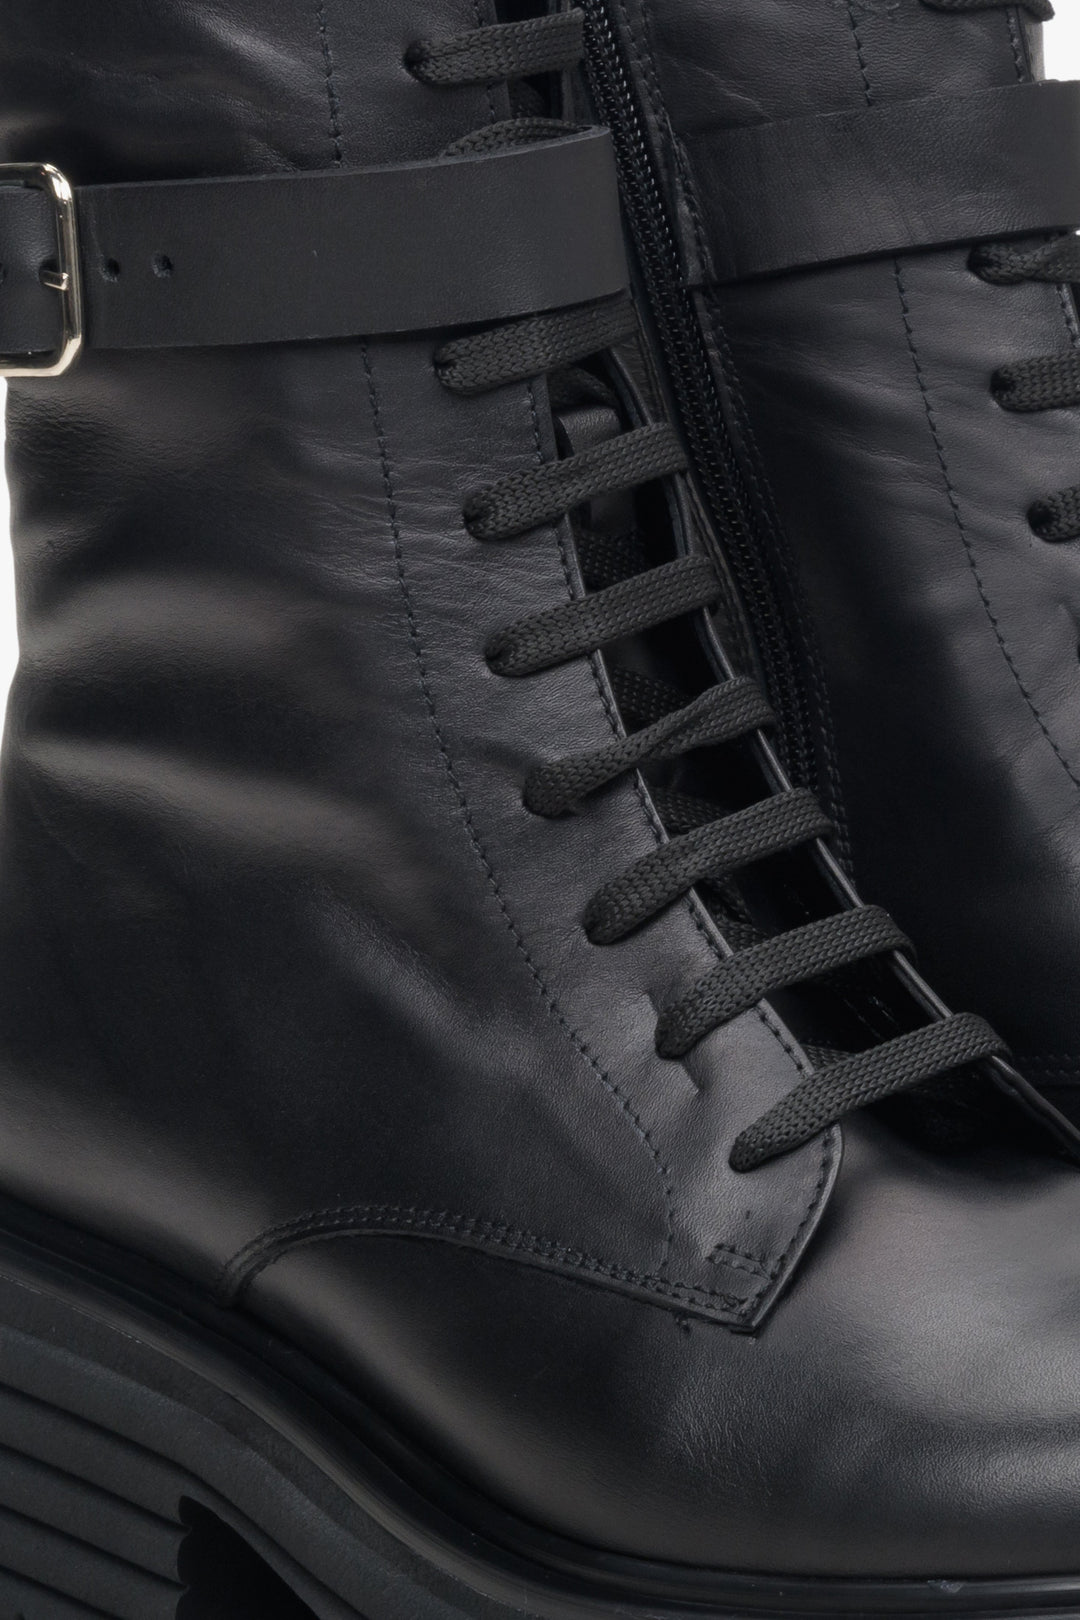 Women's black leather boots by Estro - close-up on the lacing system.